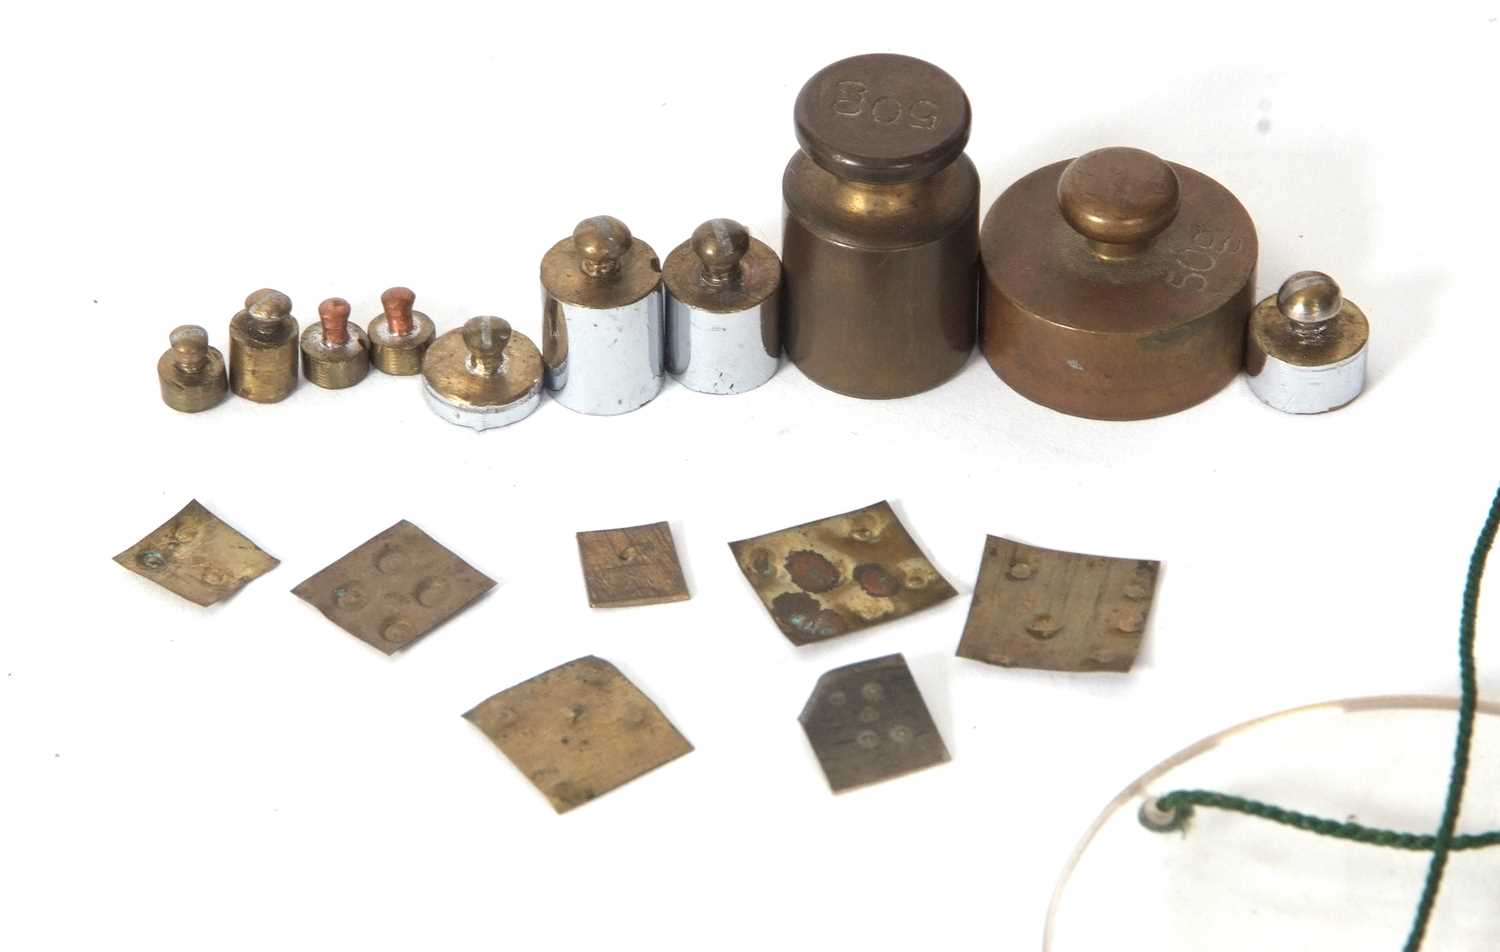 Box set of apothecary scales with glass pans, strings and weights and balance beams - Image 3 of 4